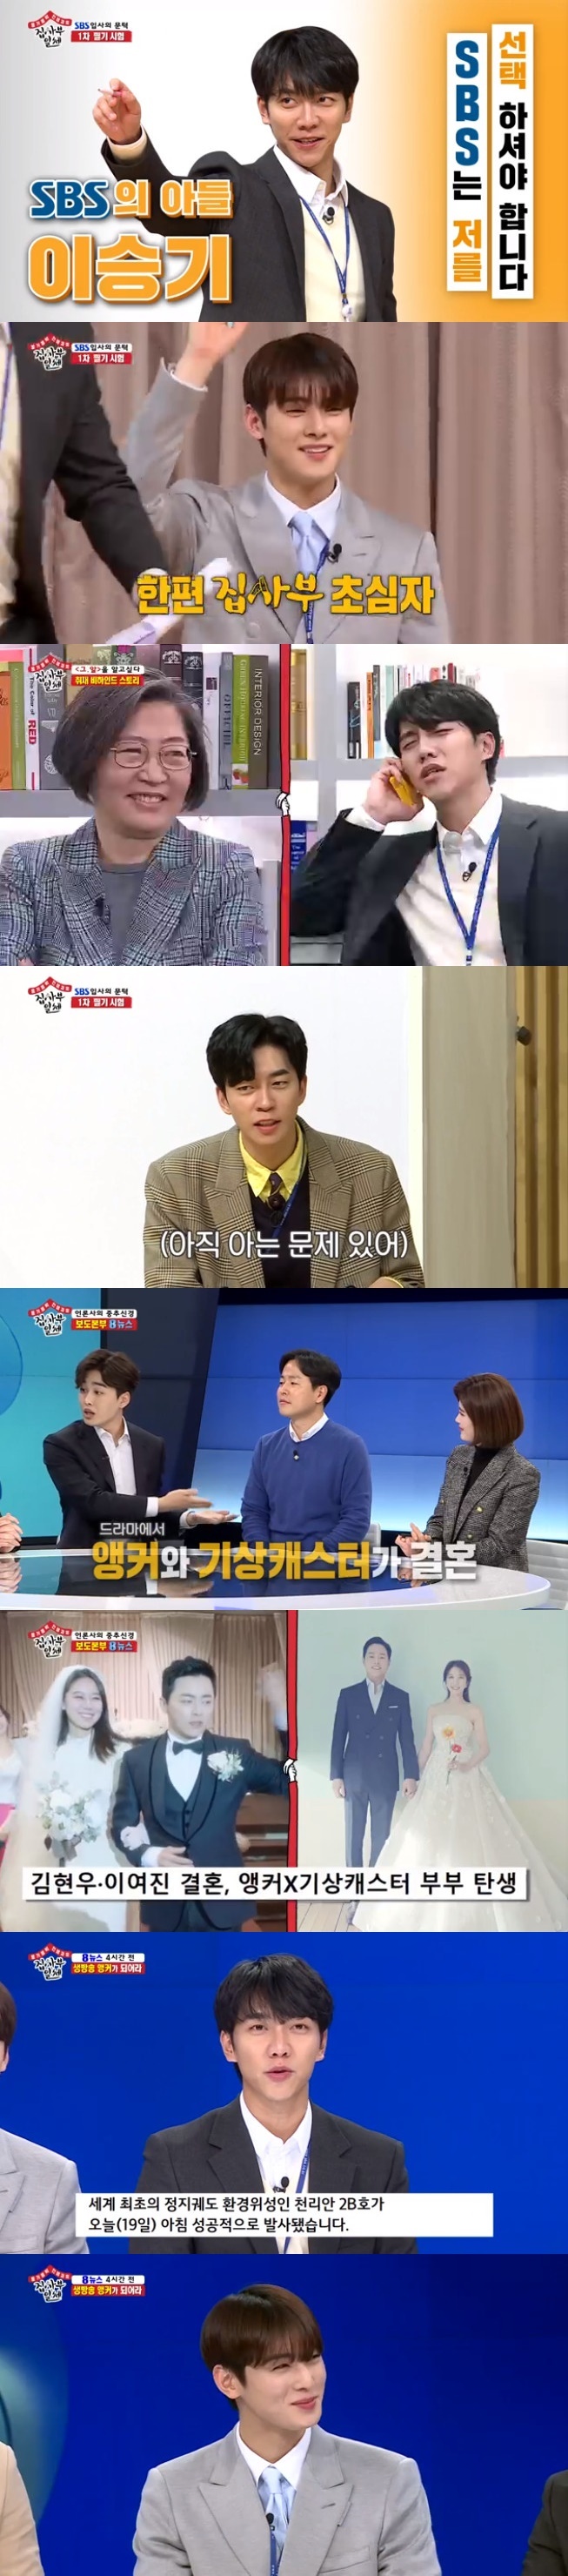 Seoul = = All The Butlers members have top model on the news.SBS All The Butlers, which was broadcasted on the afternoon of the 19th, was decorated with Broadcast Stations 24 oclock special with Lee Seung-gi, Shin Sung-rok, Yang Se-hyeong and daily disciples Cha Eun-woo and Kim Dong-Hyun.On this day, the members met at the SBS office and interviewed the interviewer behind the blind. Yang Se-hyeong said, I do not think it is an interviewer because I see the sense of speaking.The person behind the blind was Cha Eun-woo, who was all welcomed with applause when Cha Eun-woo appeared; Lee Seung-gi said: It looks so handsome in real life.Its like a real cartoon, he said, admiring.The members narrowed their distance by looking at Cha Eun-woos self-introduction letter, which said that three languages were possible: English language and Japanese.Cha Eun-woo then delivered a greeting to English language: The prosecutor and others were dreams; Cha Eun-woo said, I worked hard when I was in school.When I was the best student, I was third in the school. I actually had a student president. Yang Se-hyeong admired, What kind of life did you live? They passed the first gate of the entrance examination by solving the actual problem of writing the SBS entrance examination, and then went on field practice with the It wants to know team.In consultation with It wants to know, an interview with Professor Lee Soo-jung, a widely known criminal psychologist, was also conducted.Professor Lee Soo-jung has been consulting on It wants to know for about 20 years.In fact, I can see high quality Ry through the production crew, so Ry is not meaningful, he said.The production team explained, It is your general claim and we are paying Ry for the show. I can not give it much, but I am giving it to you.Professor Lee Soo-jung corrected, I started receiving it recently, and there was no advisory Ry for more than 10 years of 20 years.I do not give it every time I do it, but I give it to drought like a bean.It is partially strengthened, it has been verified by actual psychology. Lee Seung-gi said, My husband in your home seems to be unable to lie at all. Professor Lee Soo-jung said, It is a family member who knows that lying is useless.I know that it is meaningless, he said. Because I am processing the information, it is highly likely that I will be discovered. Professor Lee Soo-jung said, The important thing about the egg is that it is talking, and the truth that the US is solved or hidden is revealed.I started the egg when I was a shaky head, and now I have a lot of gray hair. I think I can help you until my head is a little whiter.In the Avatar of jealousy, he said, Does not he marry Gong Hyo-jin, the Weather Report Girl? In fact, Kim Hyun-woo anchor also married Lee Ji-jin, Weather Report Girl.Yang Se-hyeong was interested in the real version of jealousy incarnation .They played Top Model on SBS News on the day of recording.After reporting the given manuscript, the sports news hosts selected by the two senior anchors were Lee Seung-gi and the radio news host was Cha Eun-woo.Kim Yoon-sang announcer appeared and learned news reporting to Lee Seung-gi and Yang Se-hyeong.